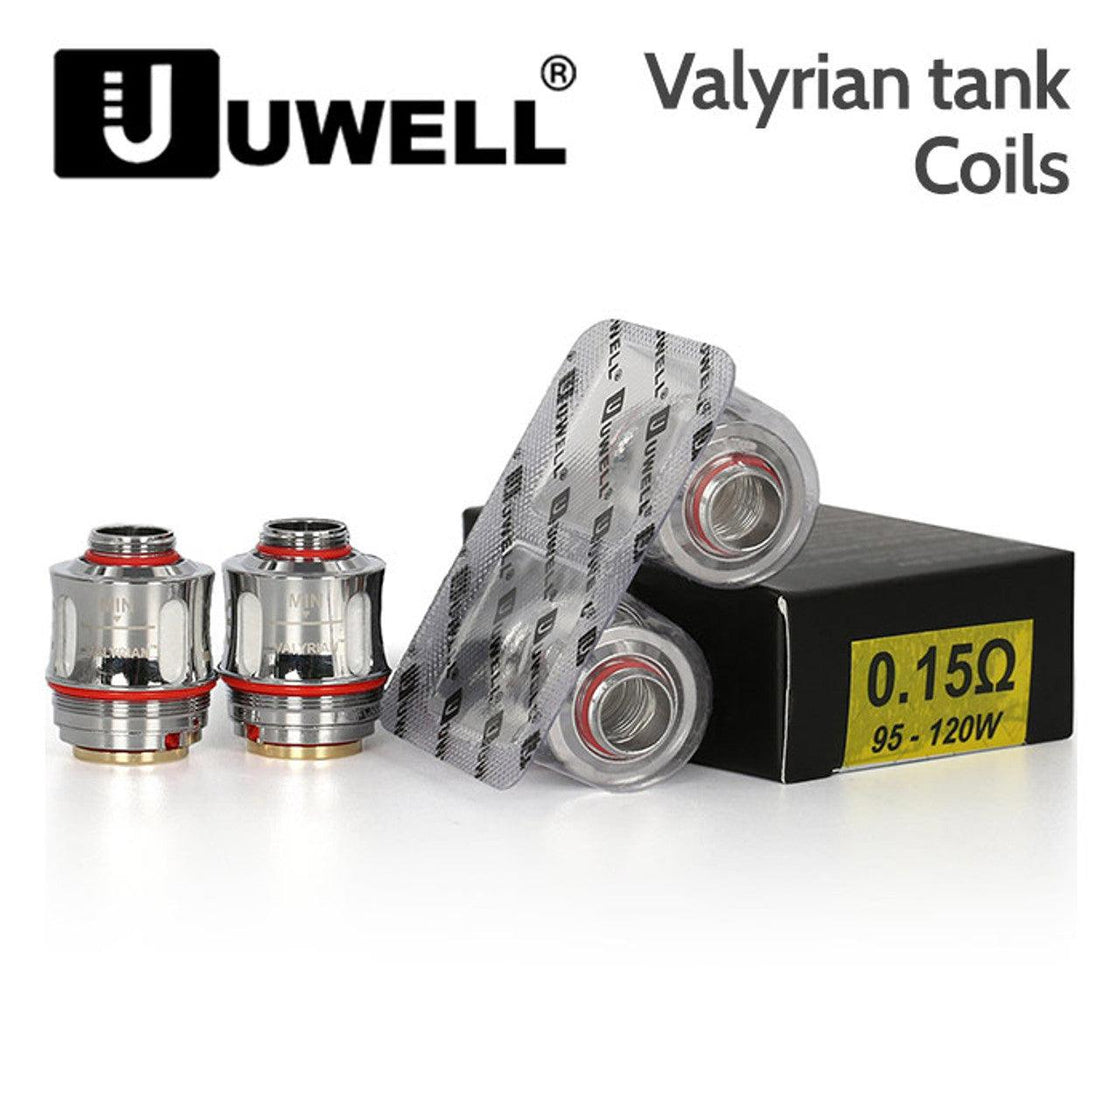 UWELL VALYRIAN COILS - PACK OF 2 - Vapeslough